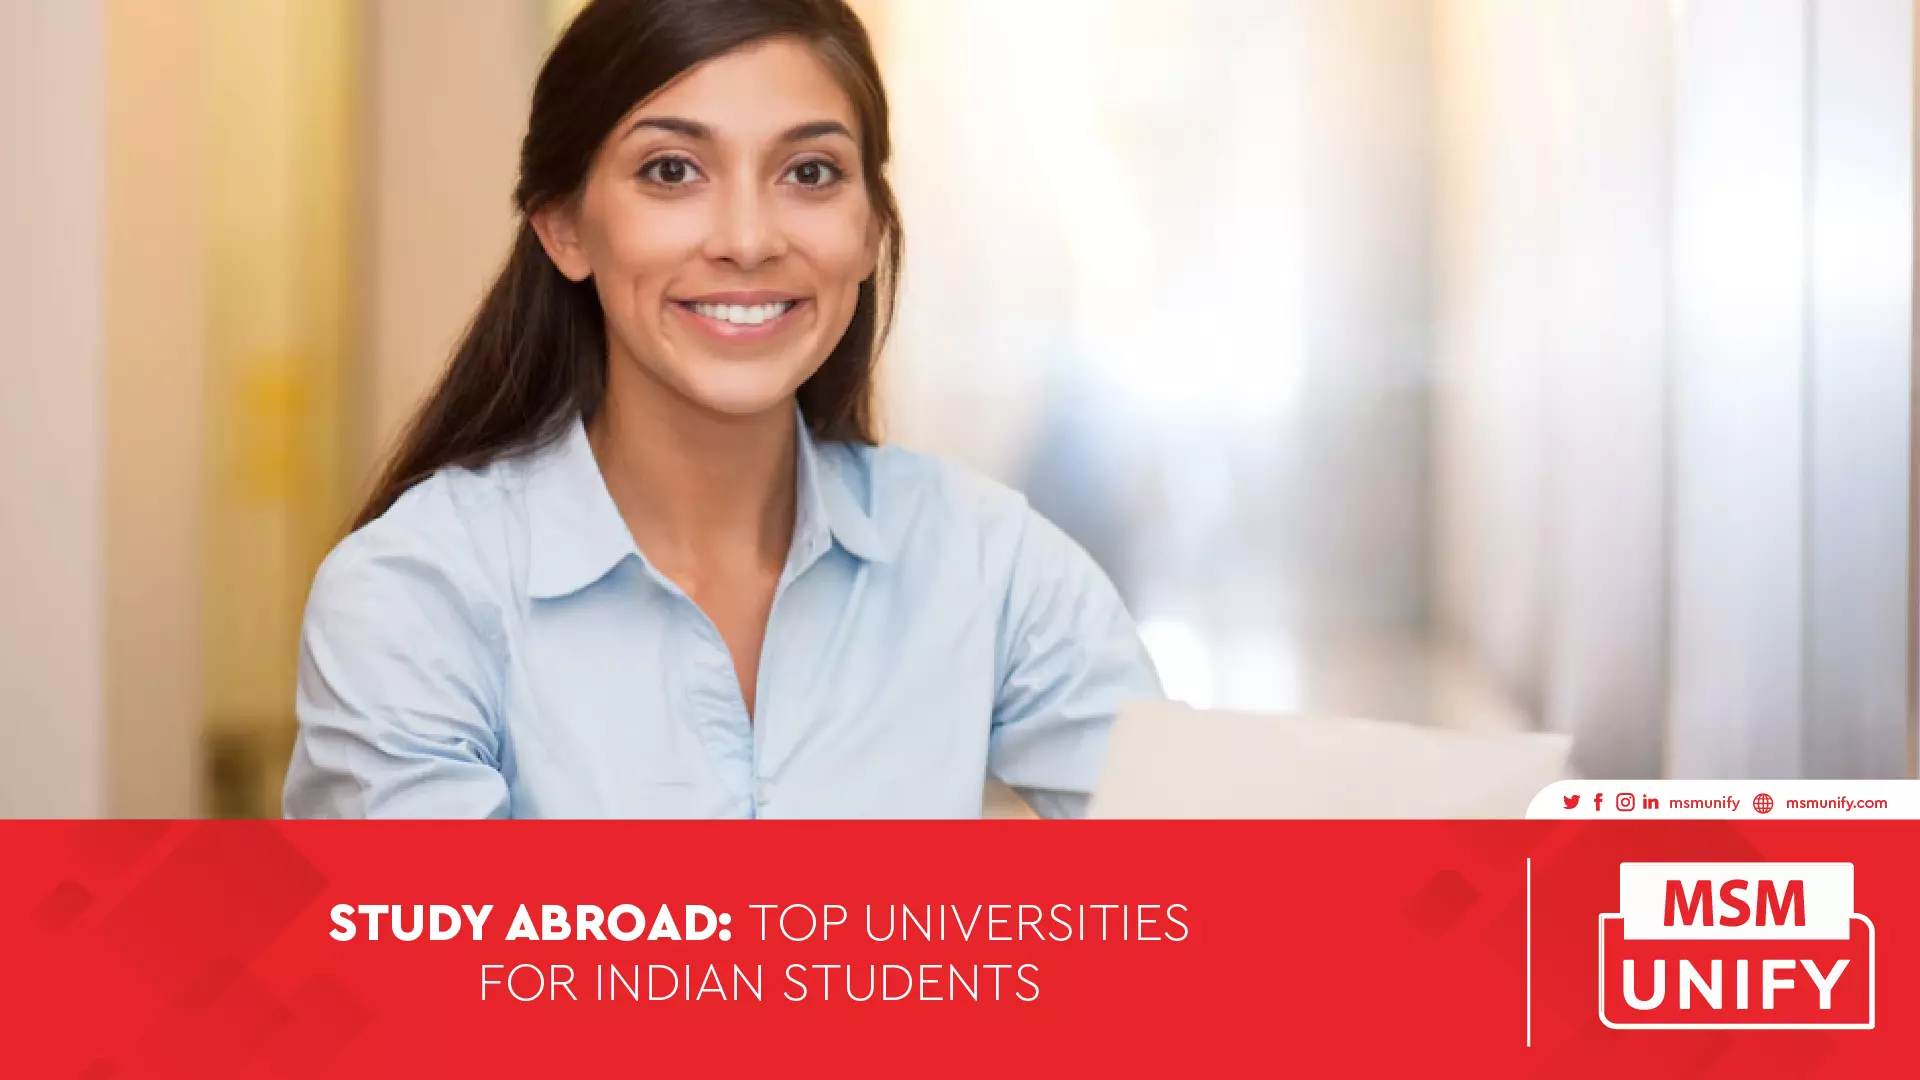 122022 MSM Unify Study Abroad Top Universities for Indian Students 01